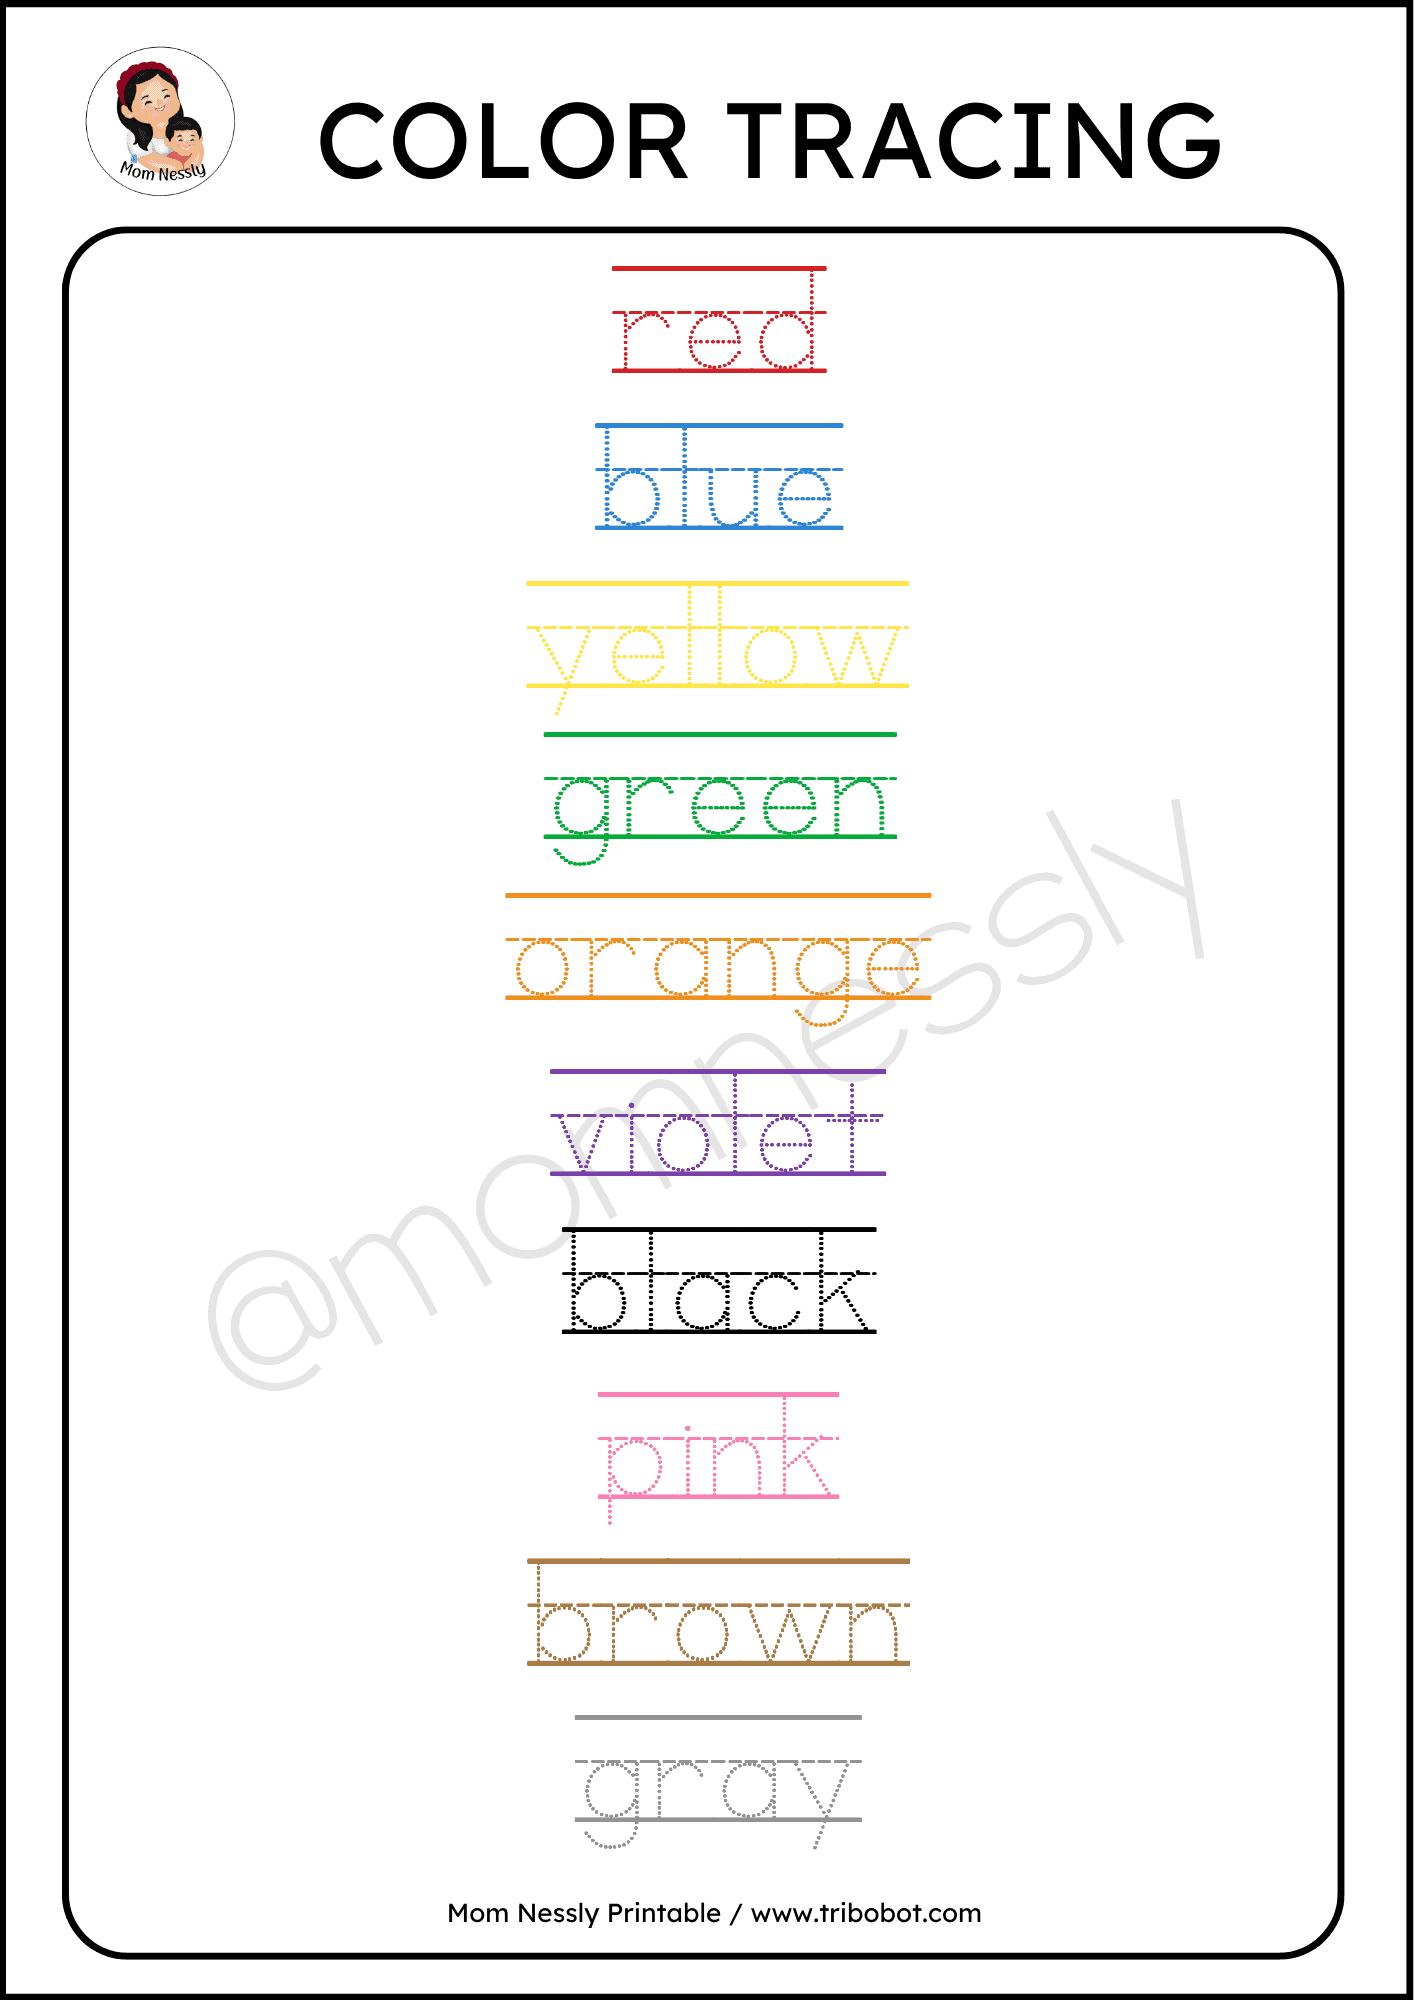 Colors Worksheets Mom Nessly